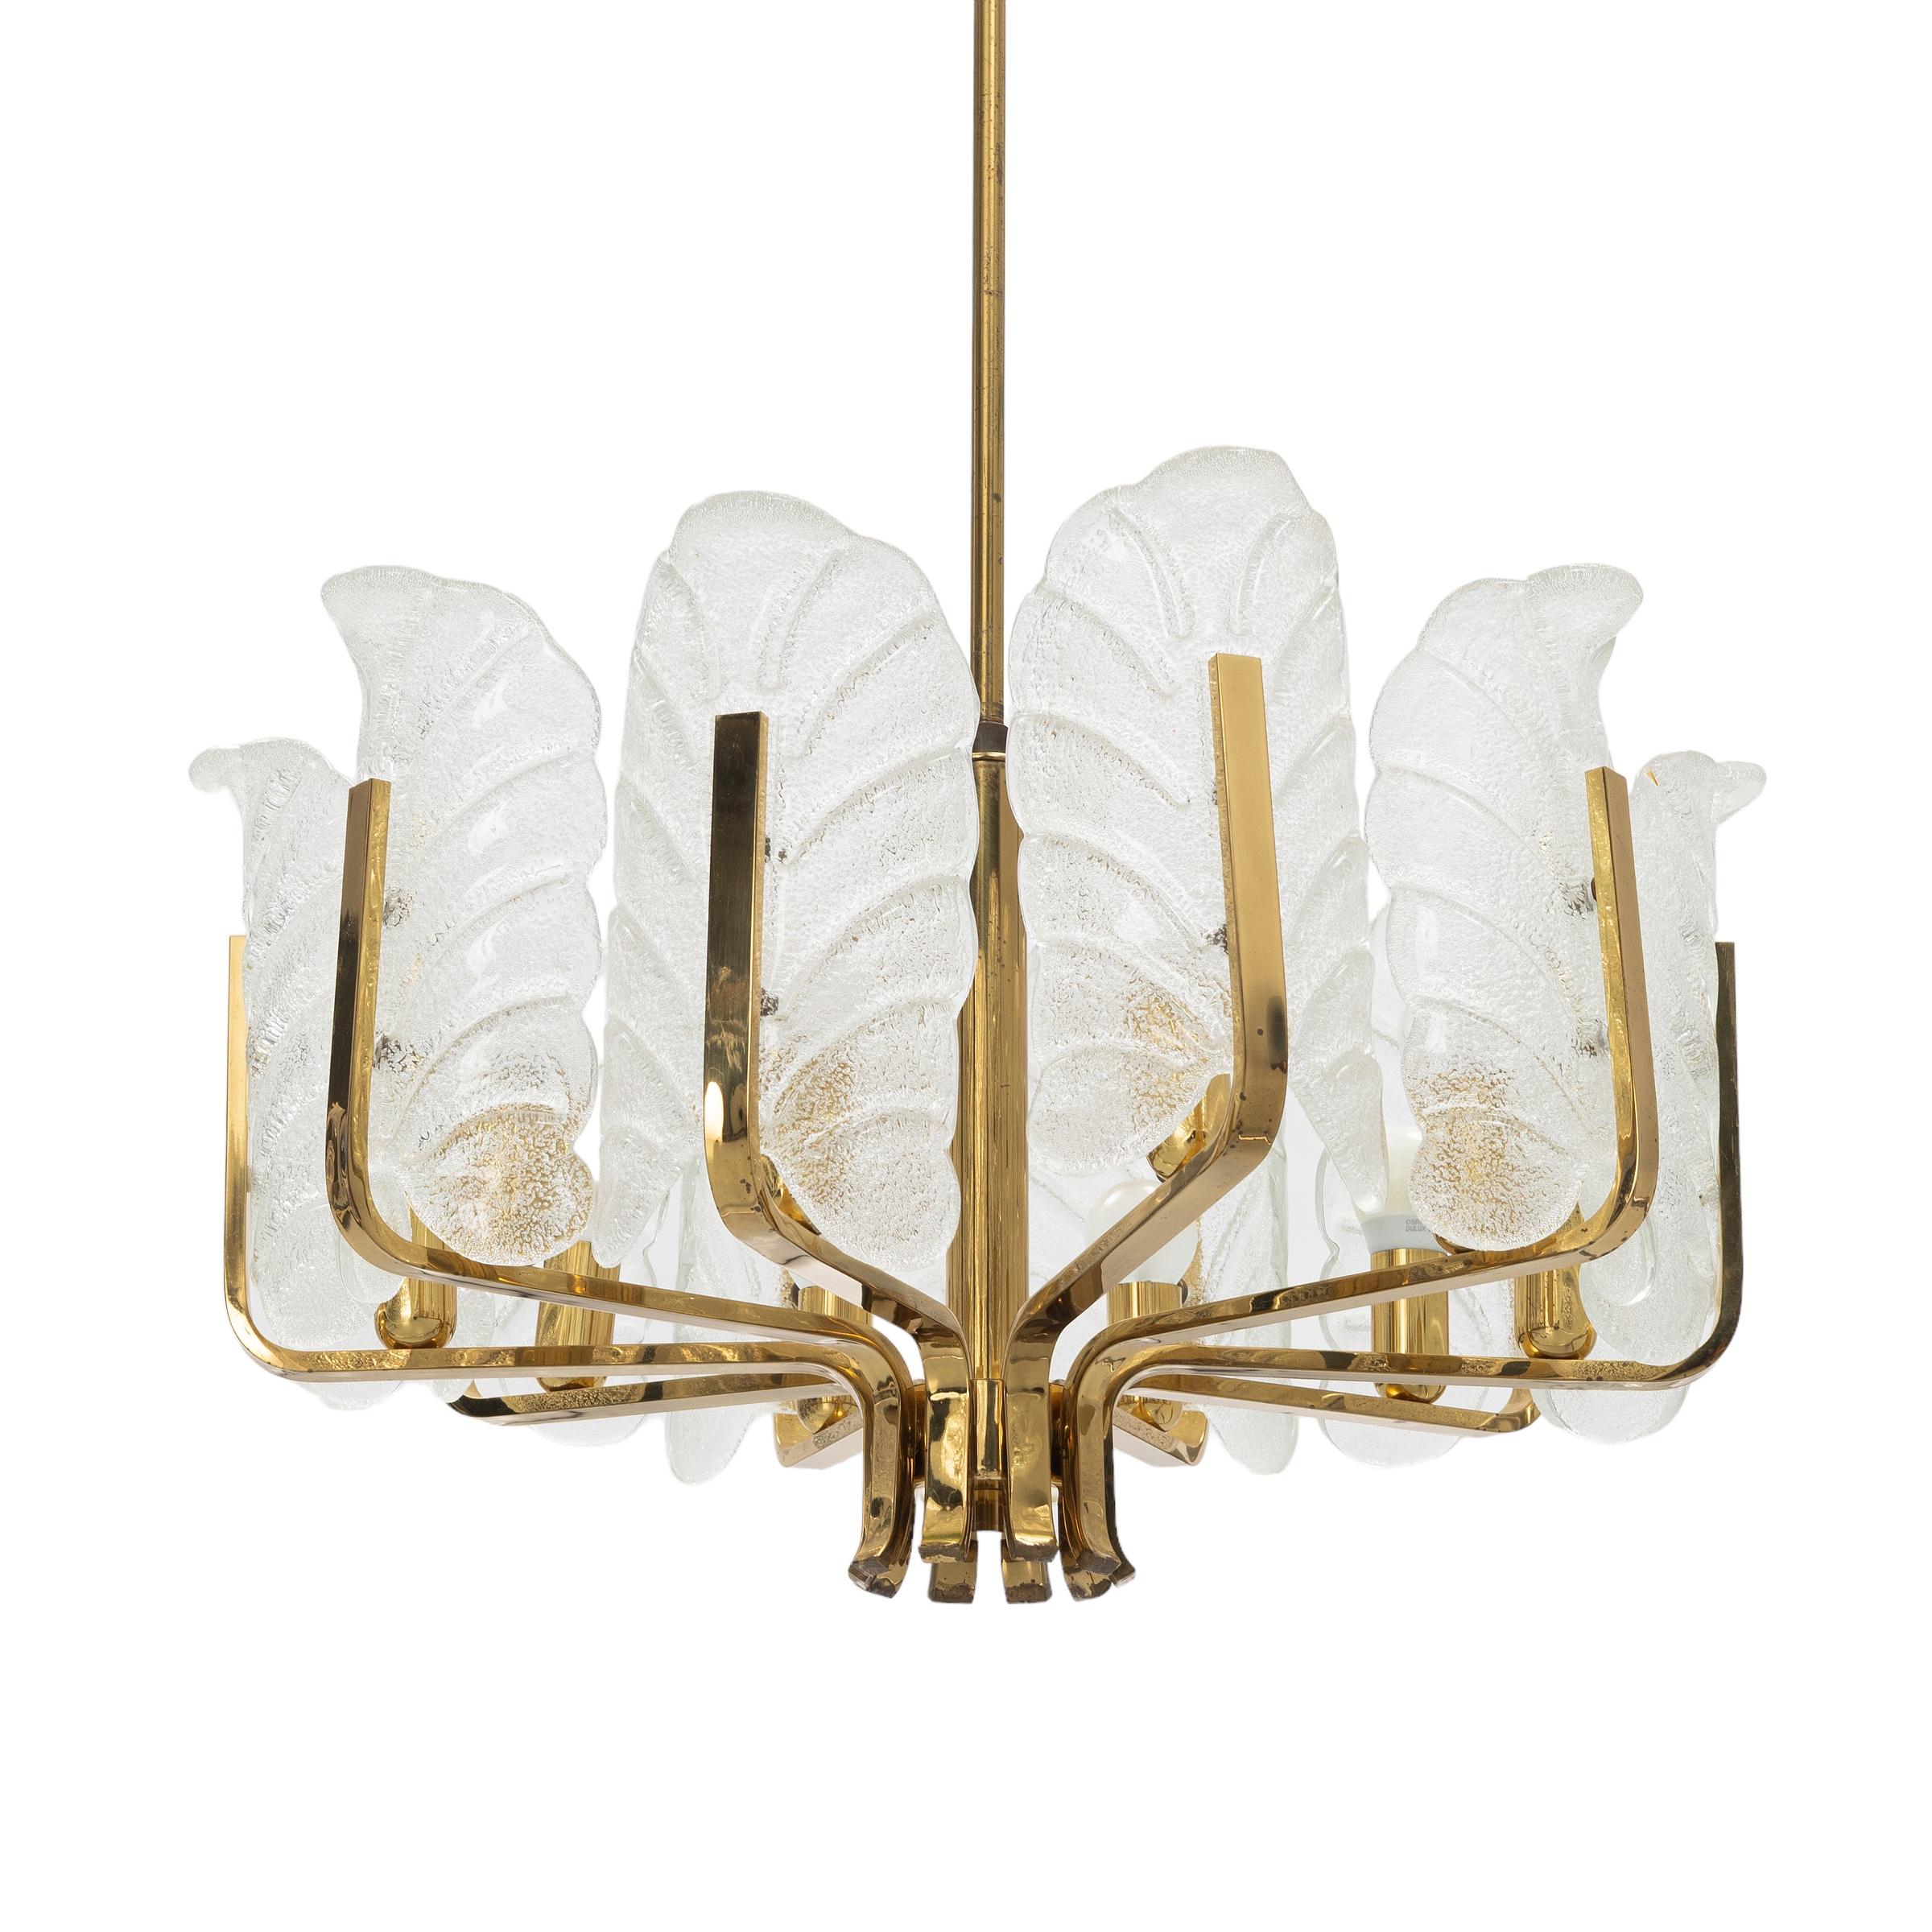 Very beautiful ceiling lamp in brass with decorative leaves of Murano glass. The lamp was designed by Carl Fagerlund for orrefors in the 60s.